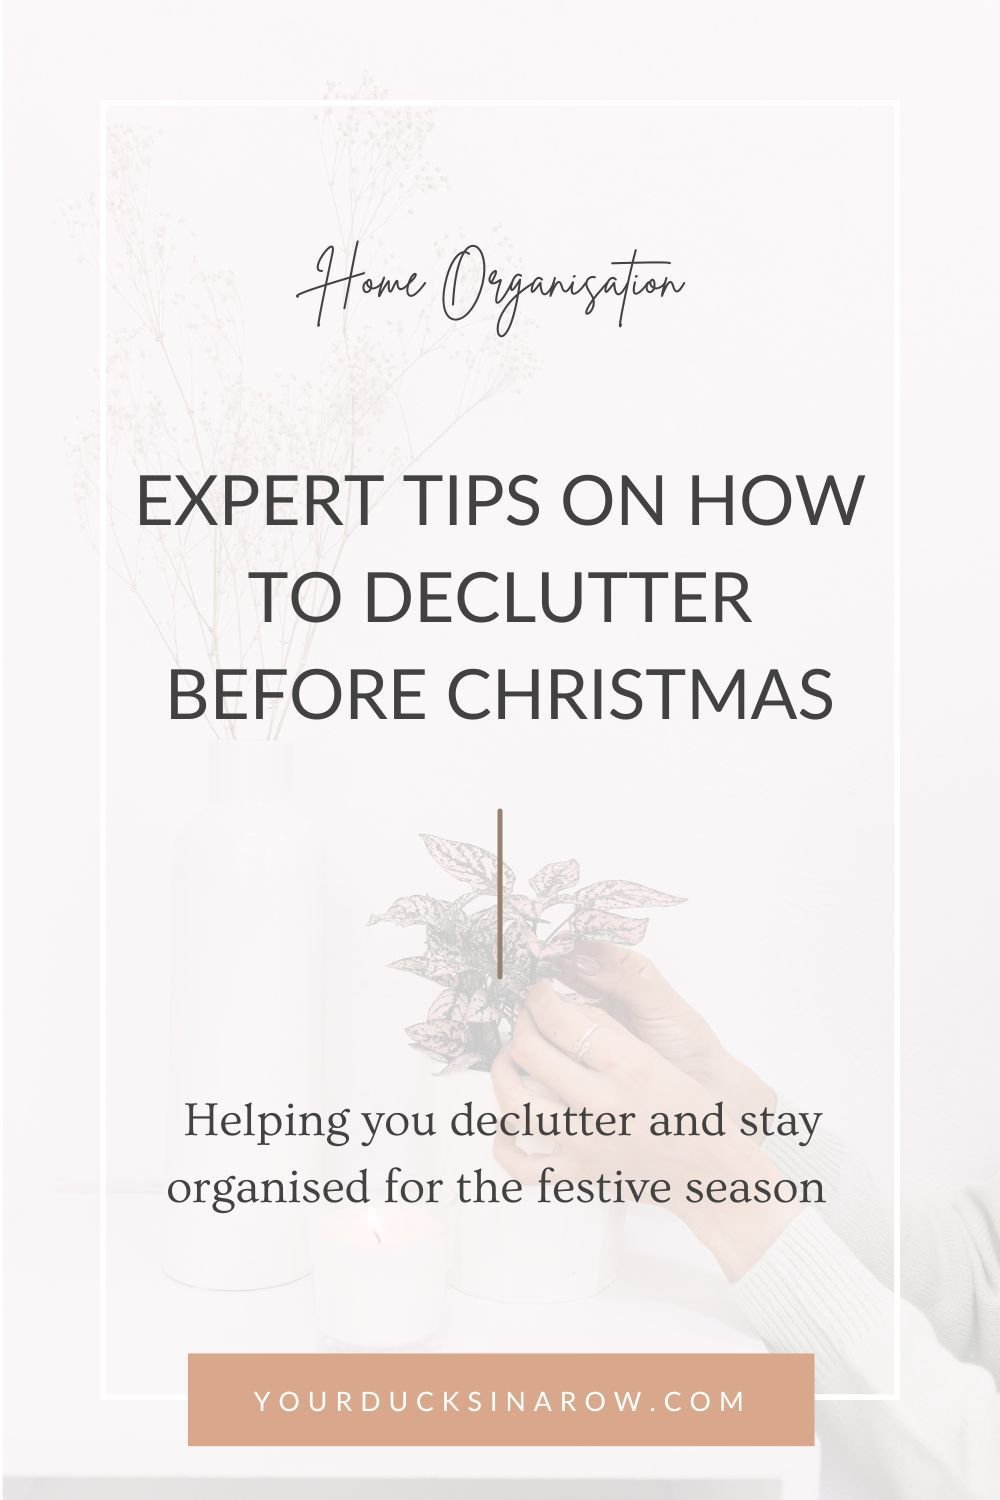 Expert tips on how to declutter before Christmas